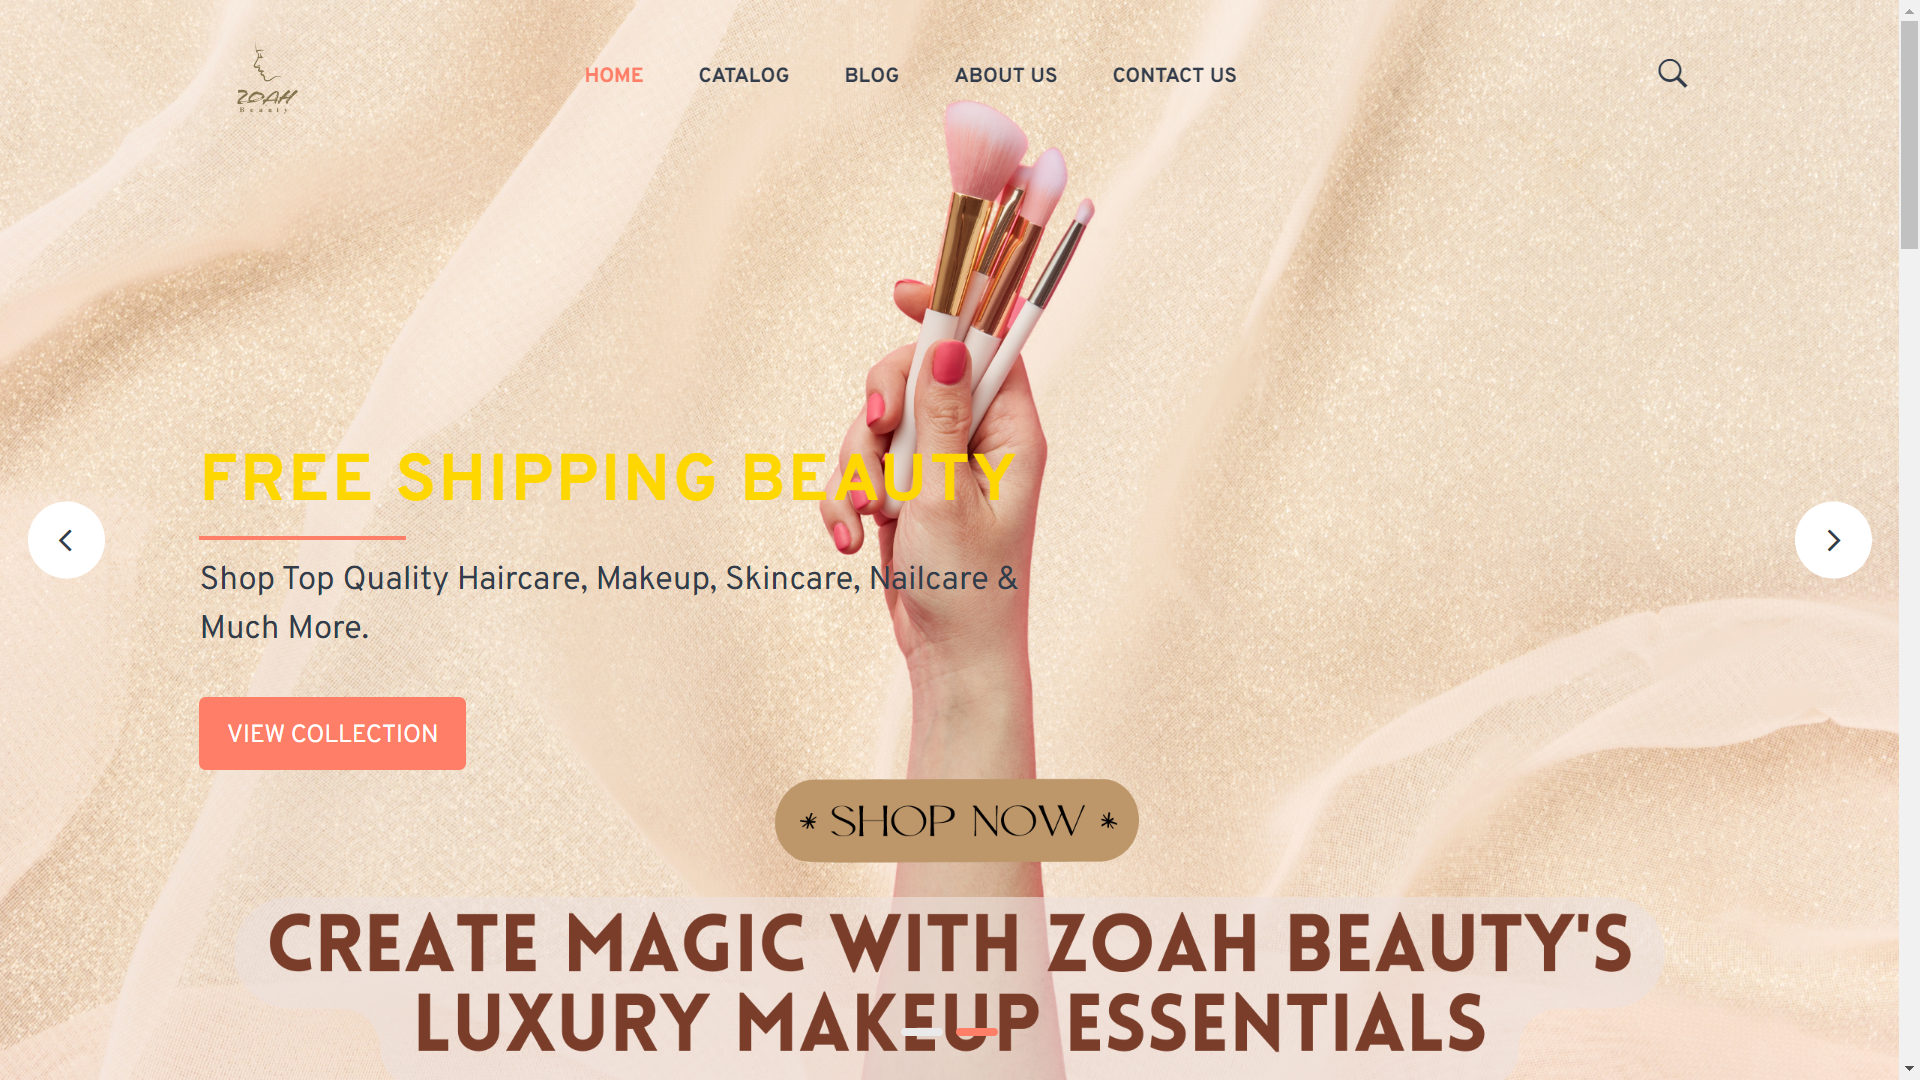 A website for a beauty brand